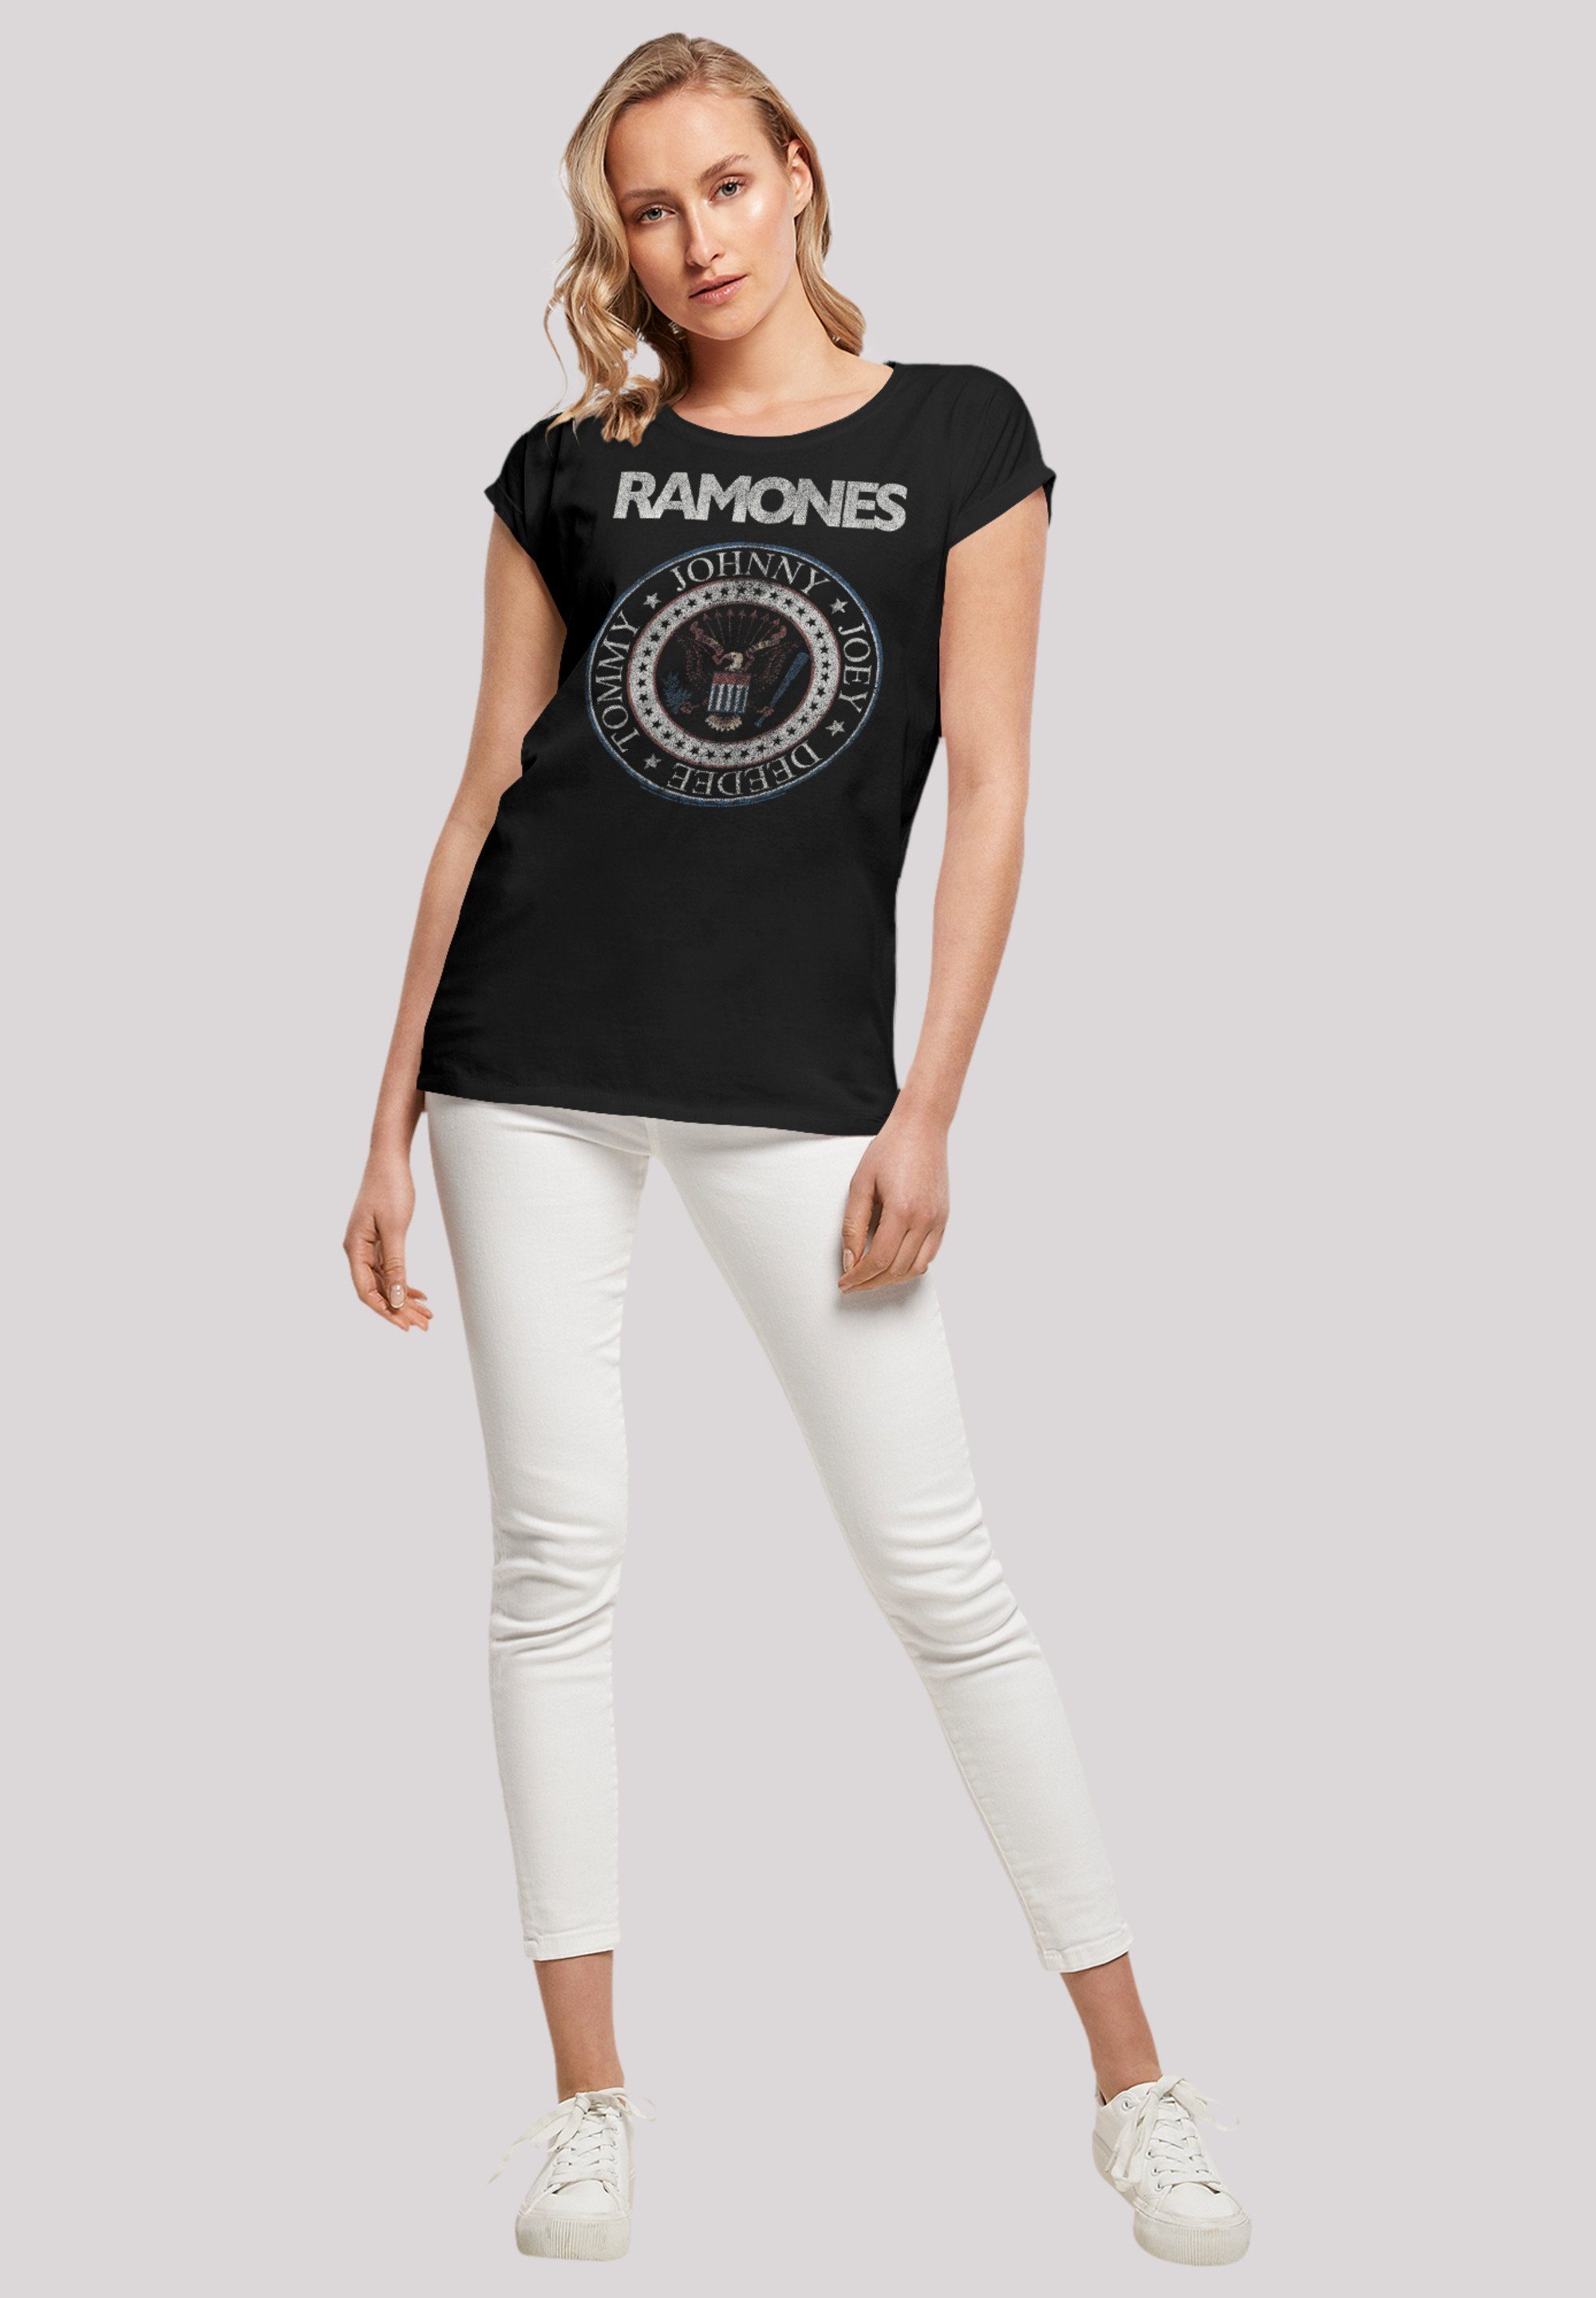 Qualität, F4NT4STIC Red Rock Band White Ramones Rock-Musik Seal Premium T-Shirt Band, And Musik